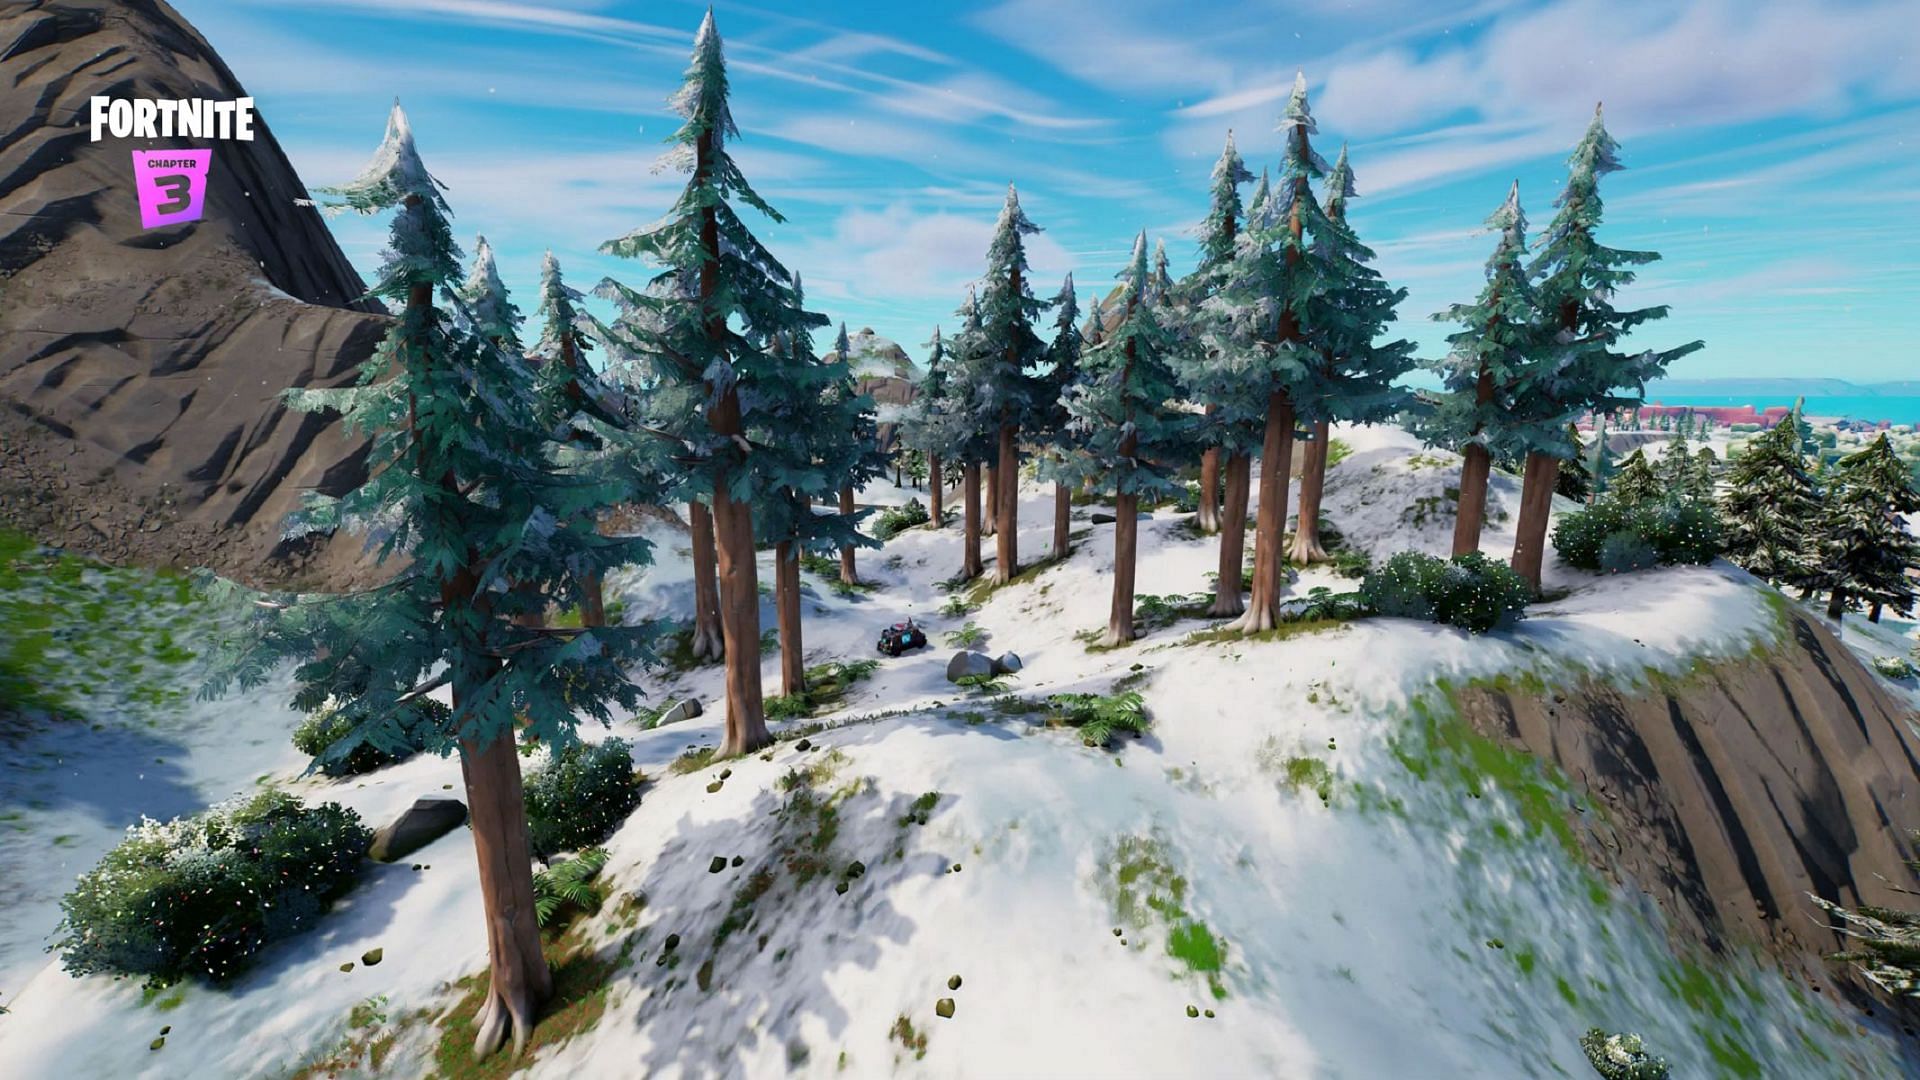 Look out below when chopping down Timber Pines in Fortnite (Image via Epic Games/Fortnite)